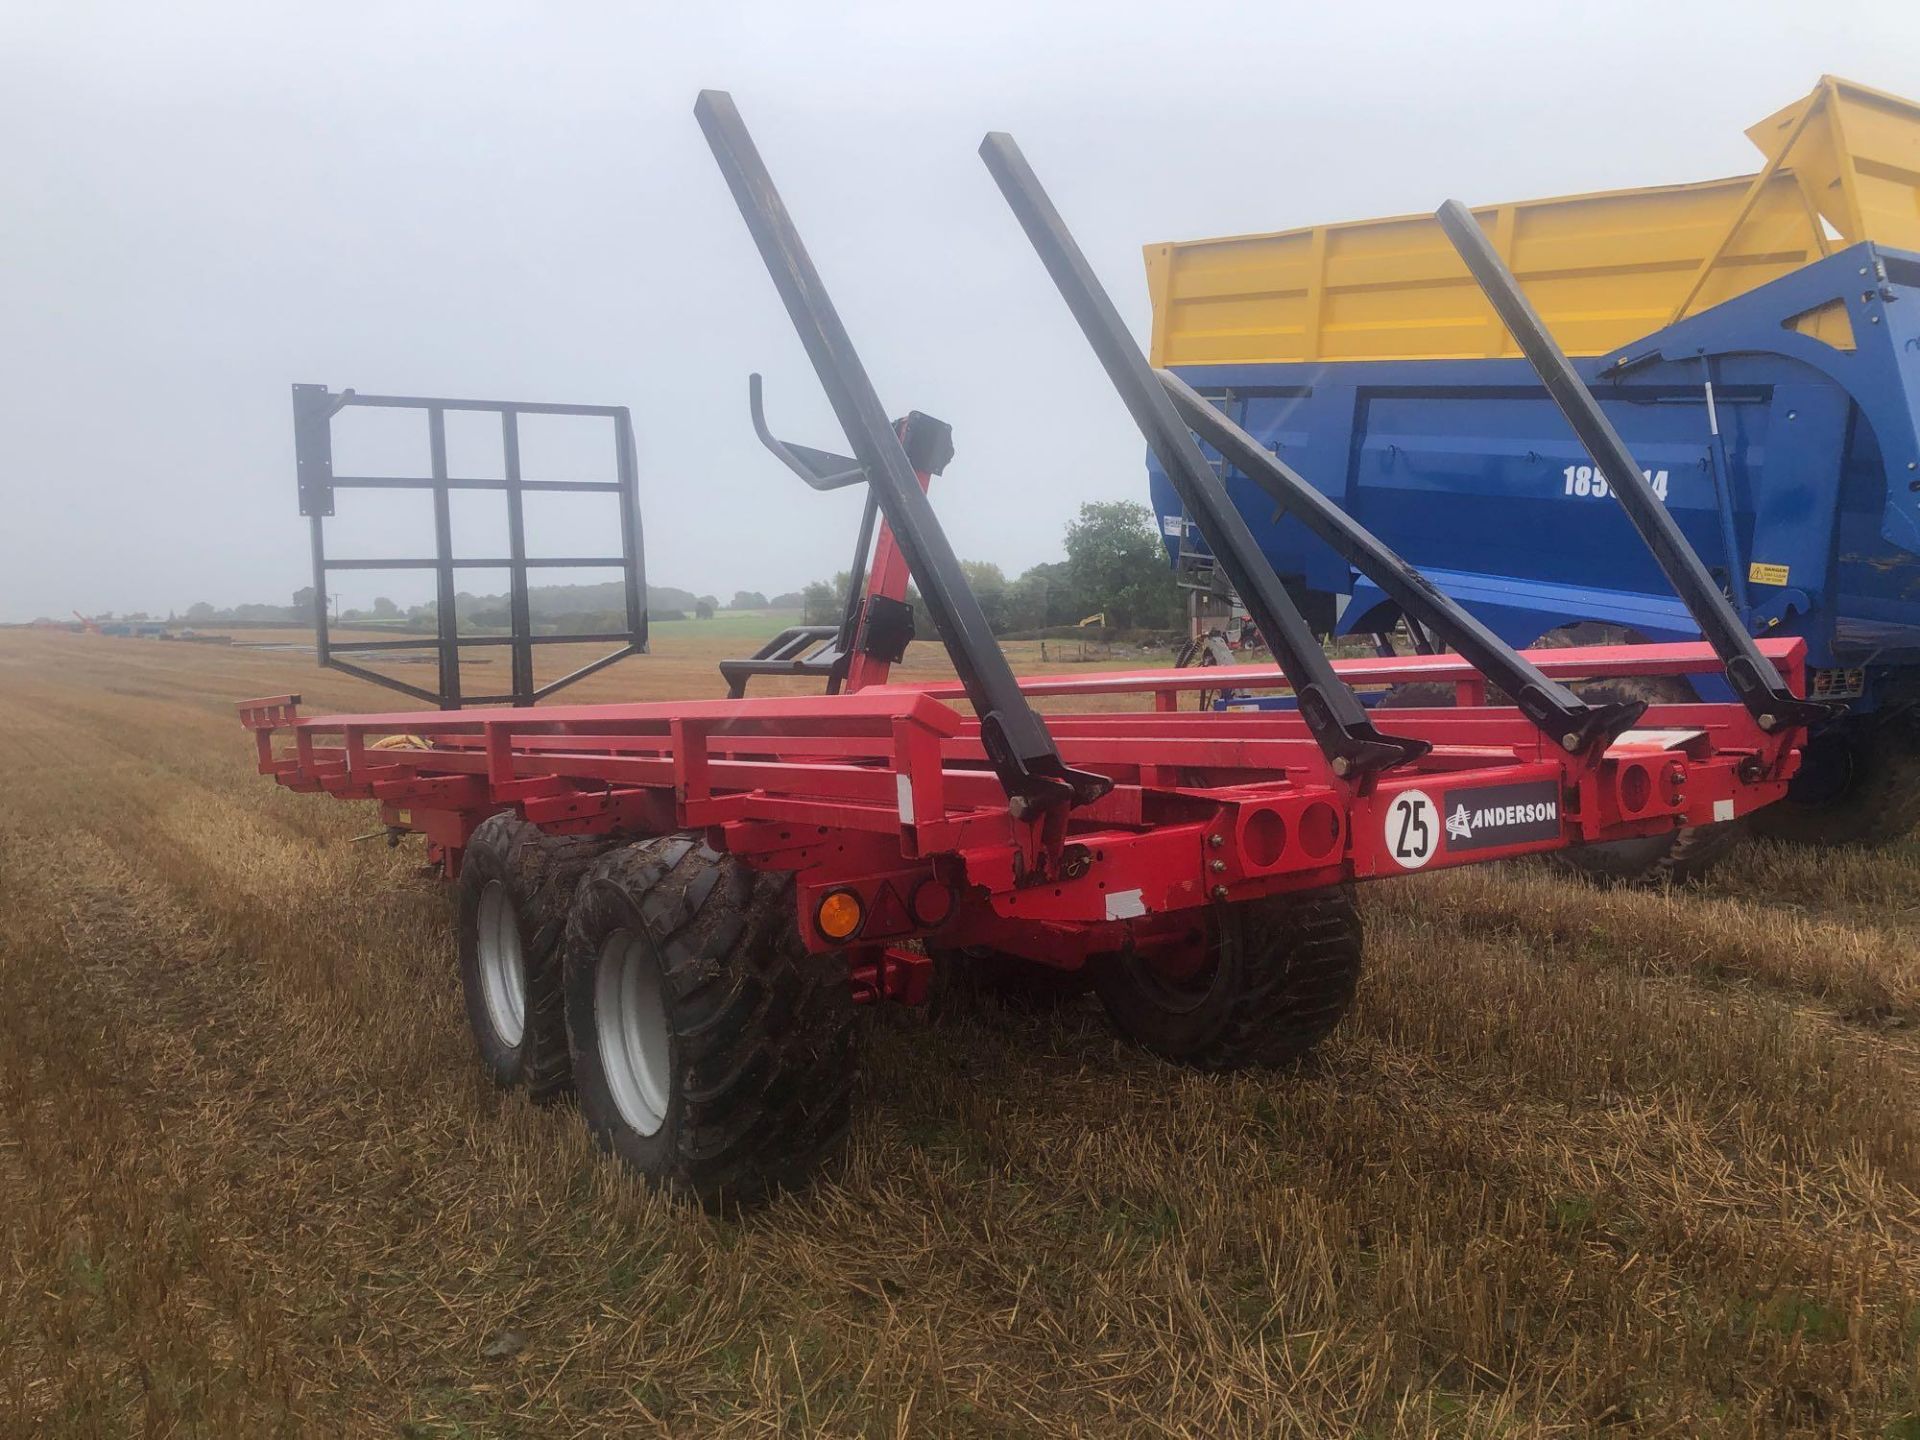 2014 Anderson TRB2000 twin axle bale chaser with air brakes & flotation tyres. Holds 20 round bales. - Image 5 of 5